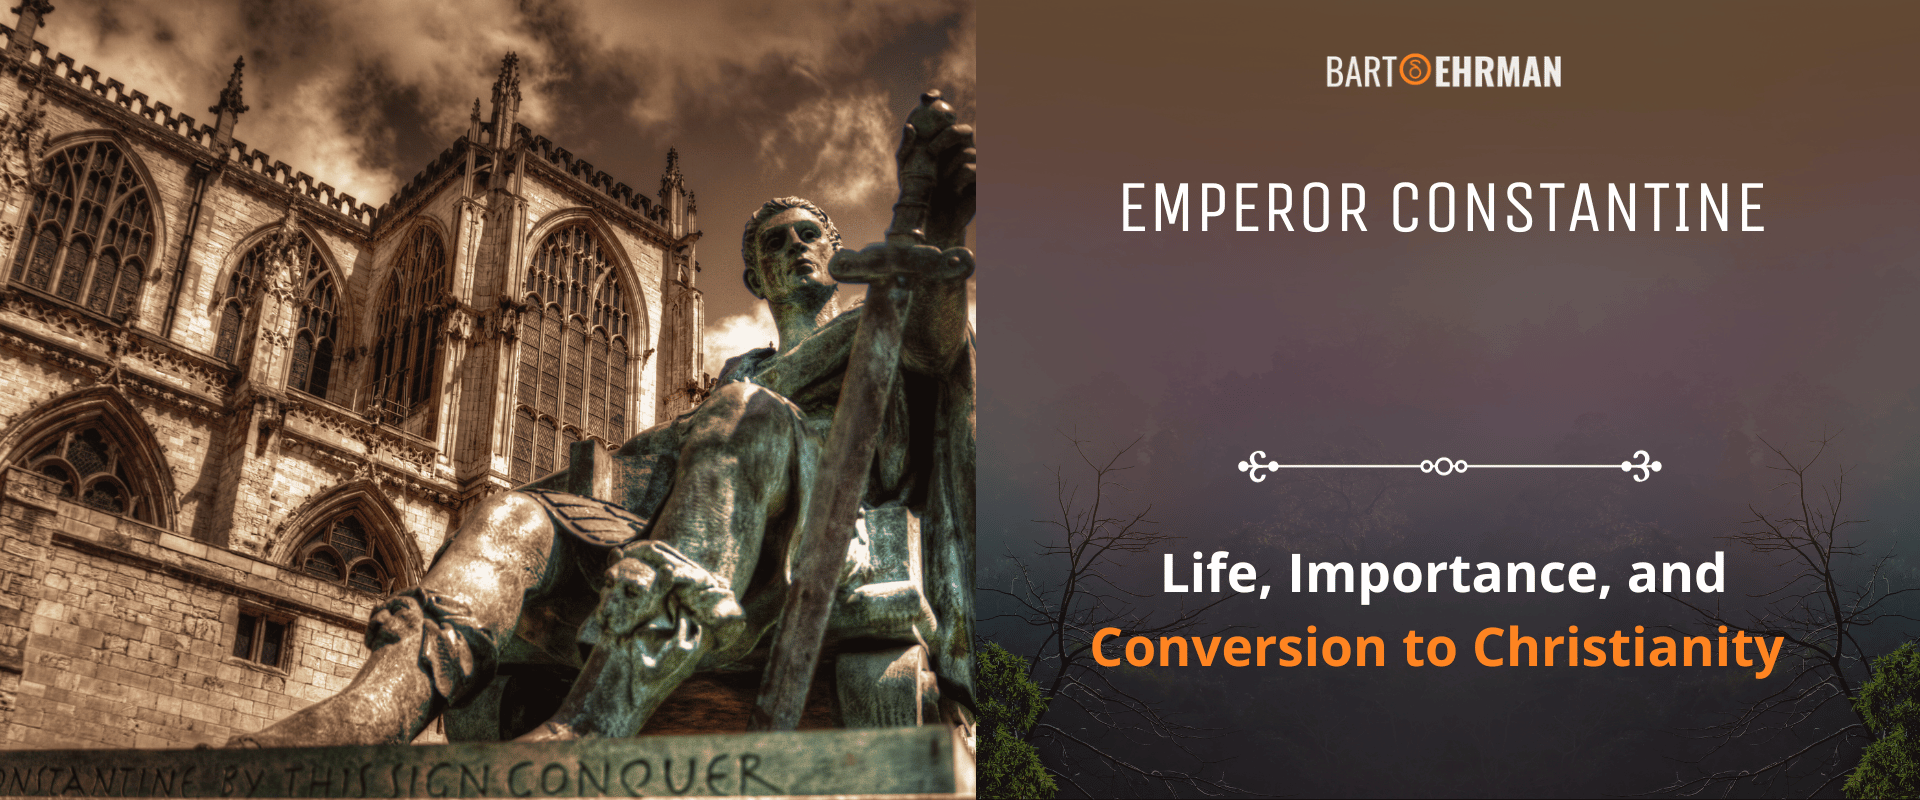 Emperor Constantine - Life, Importance, and Conversion to Christianity